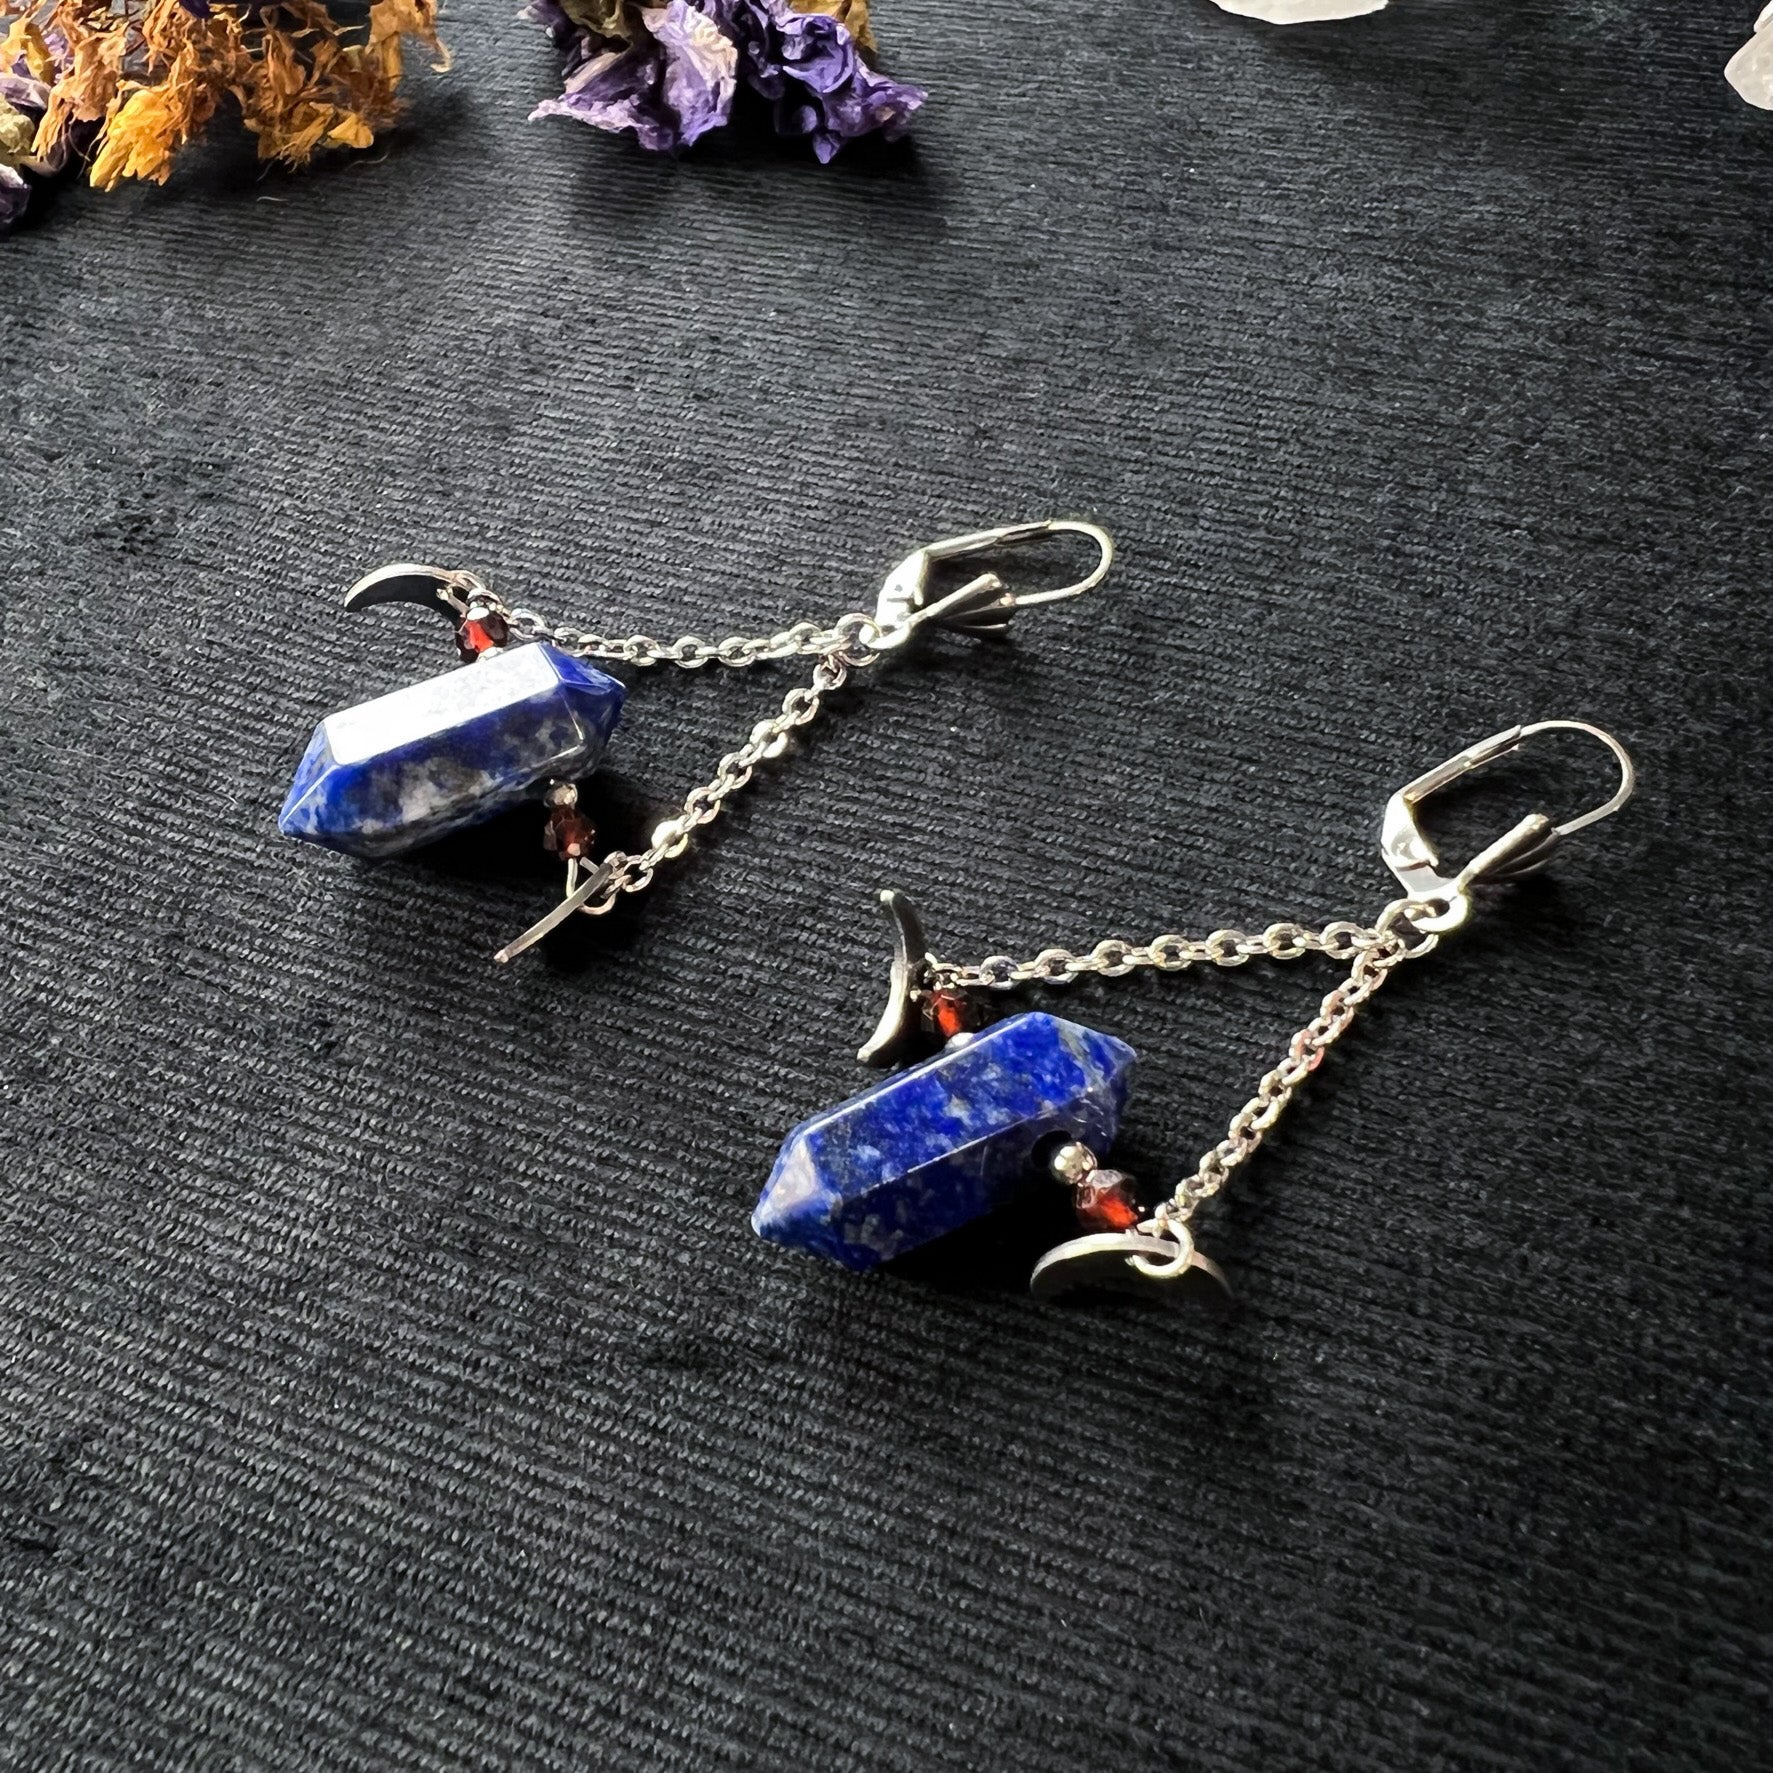 Lapis lazuli garnet and stainless steel gemstone earrings with Moon crescent